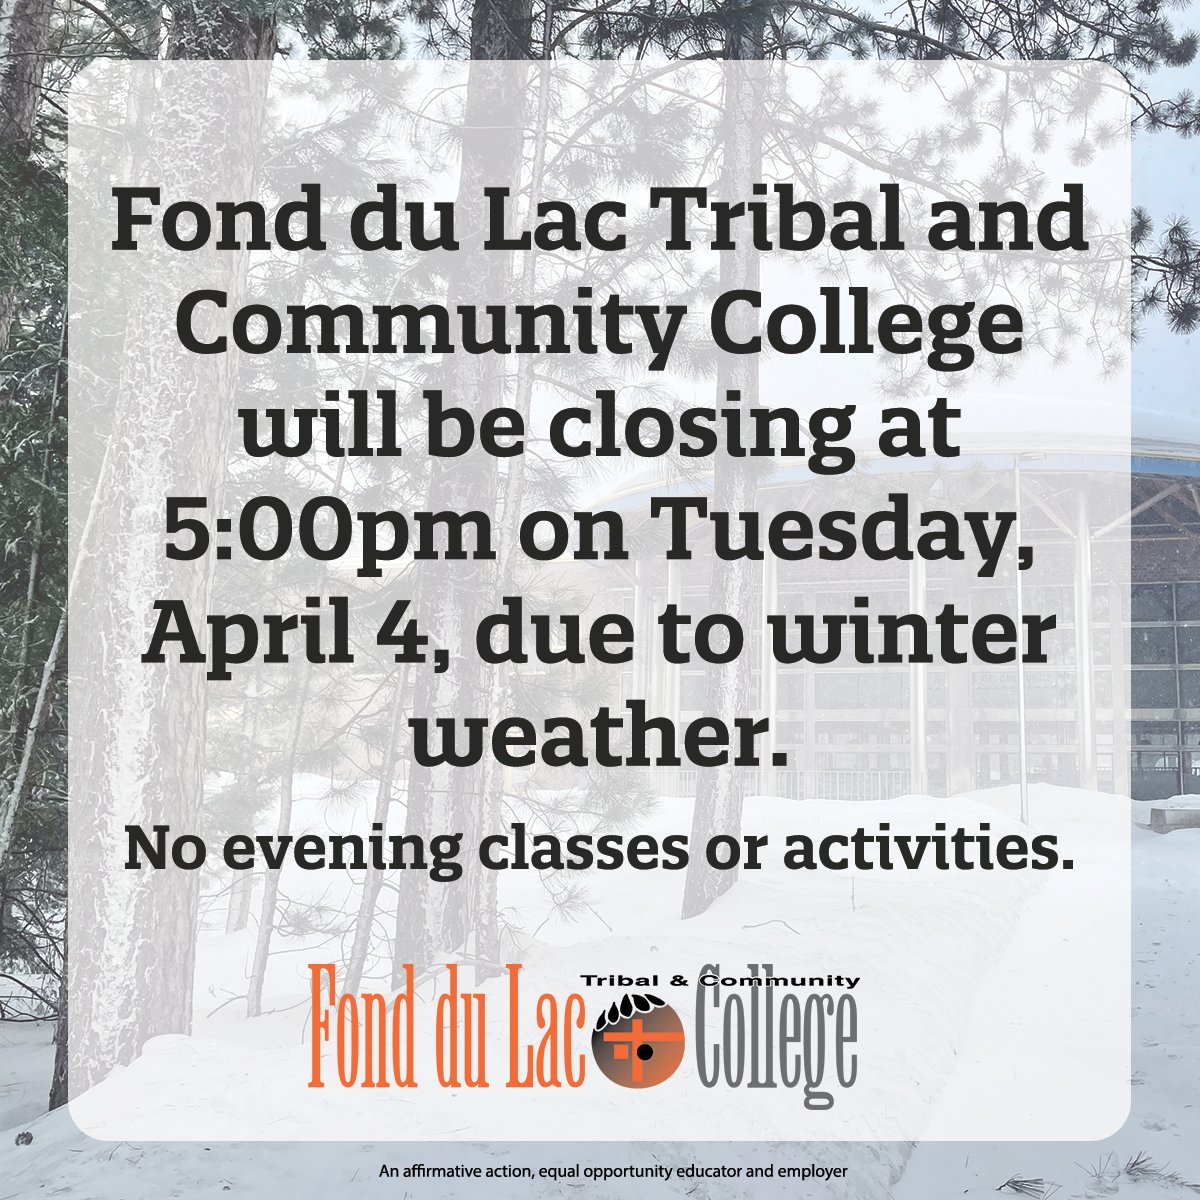 Fond du Lac Tribal and Community College will be closing at 5:00pm today, April 4, due to winter weather. No evening classes or activities.